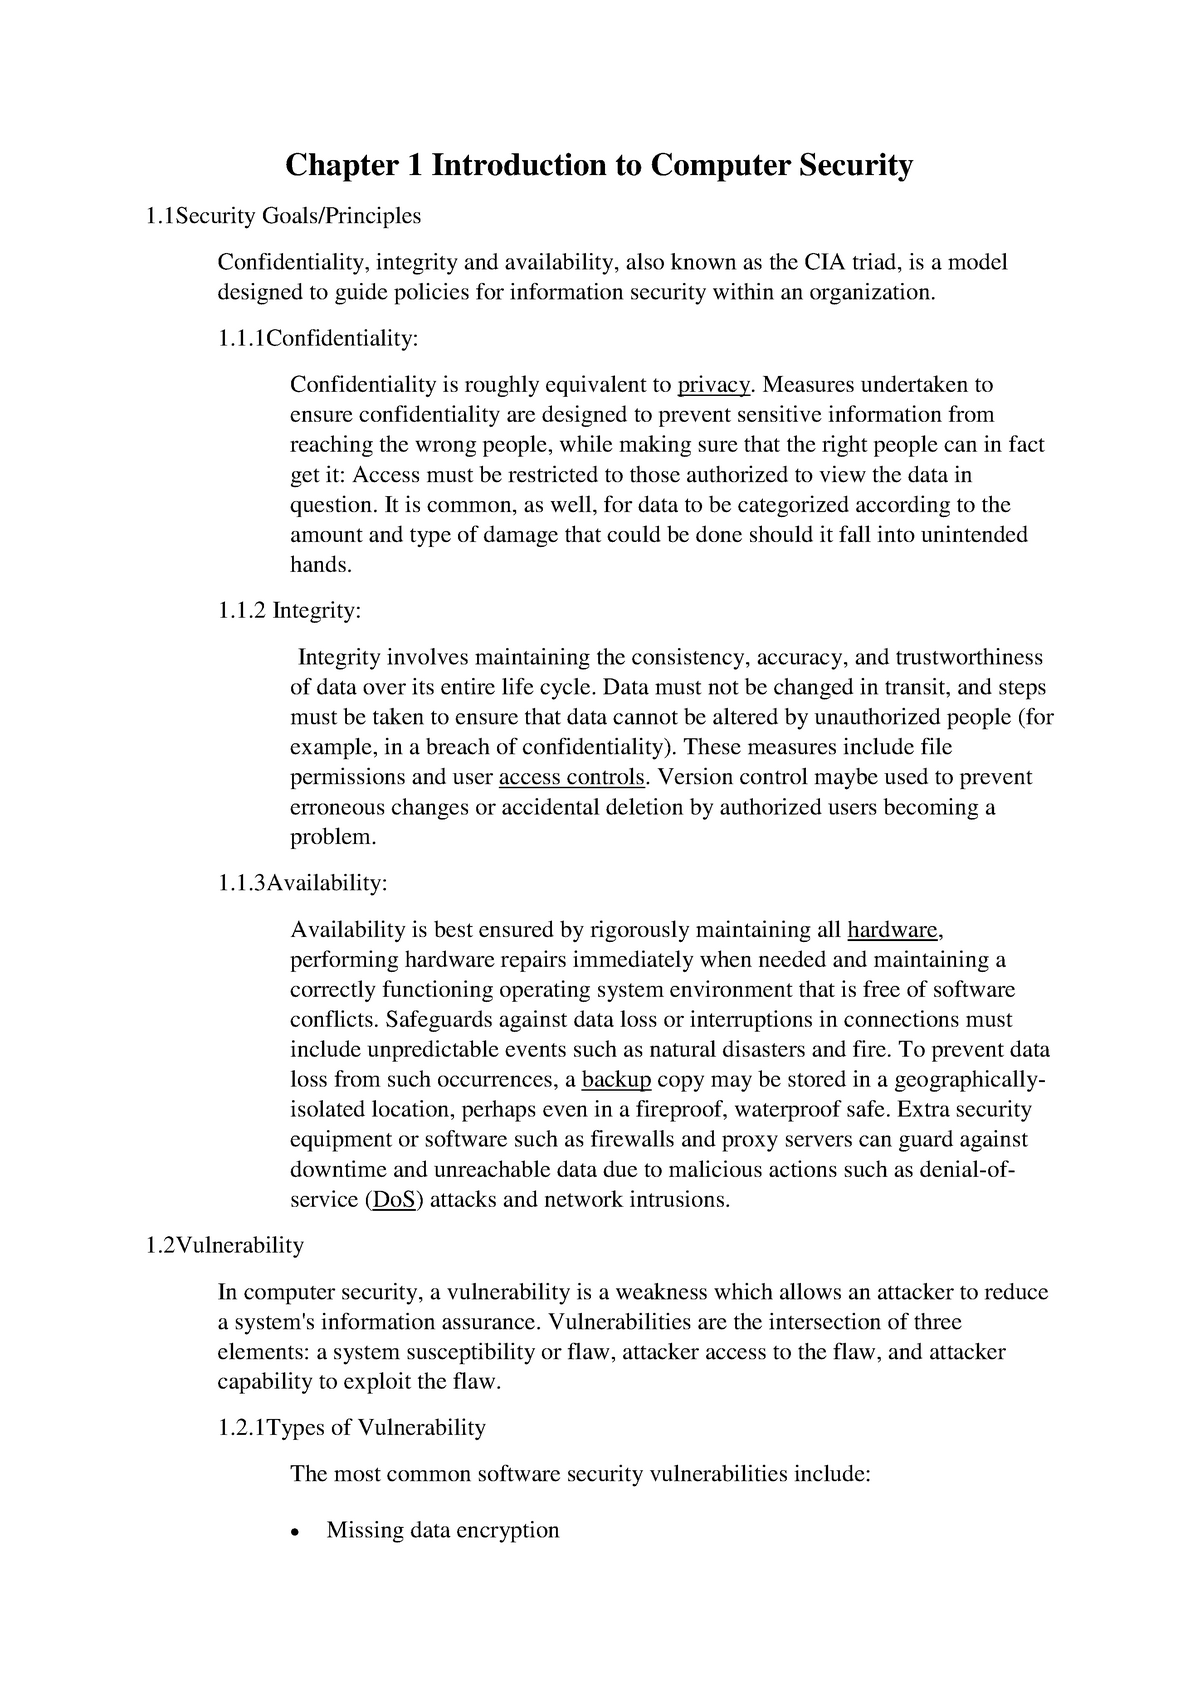 research paper on operating system security pdf